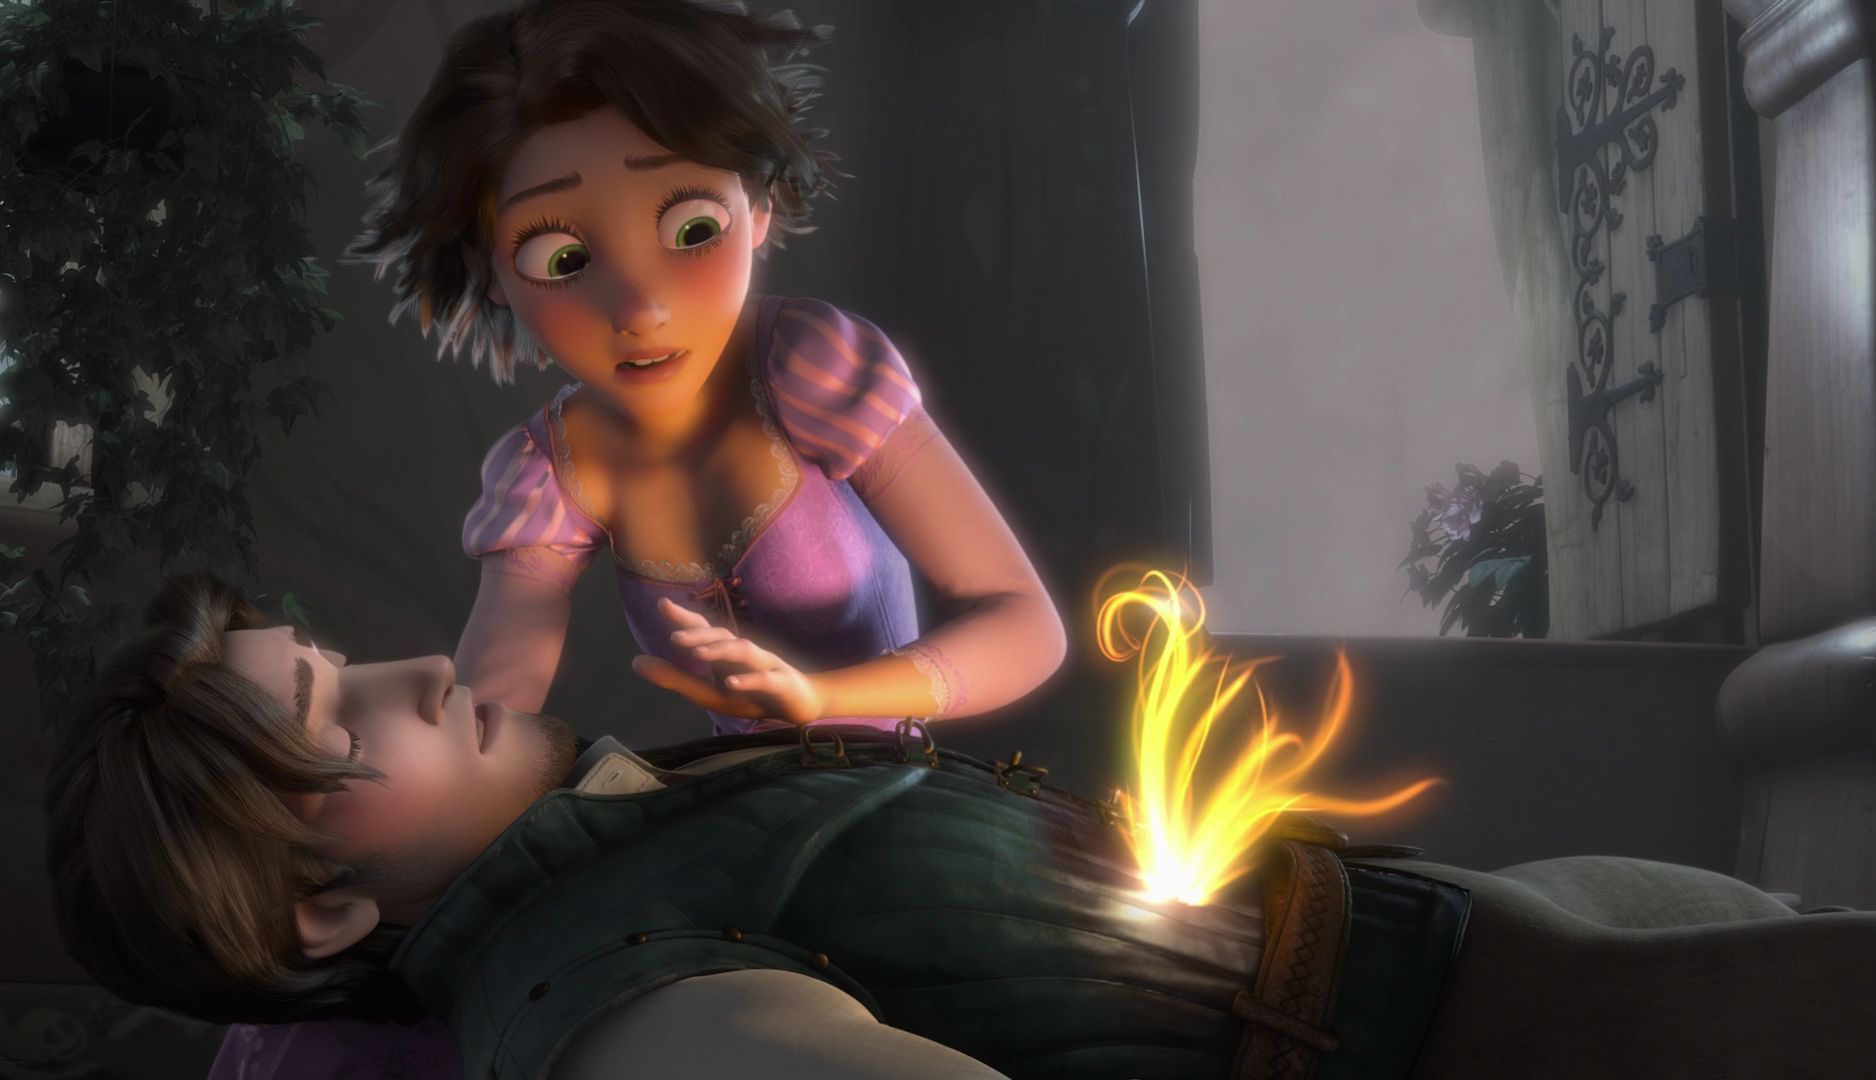 Image of Tangled: Full Movie [Screencaps] for fans of Tangled. 